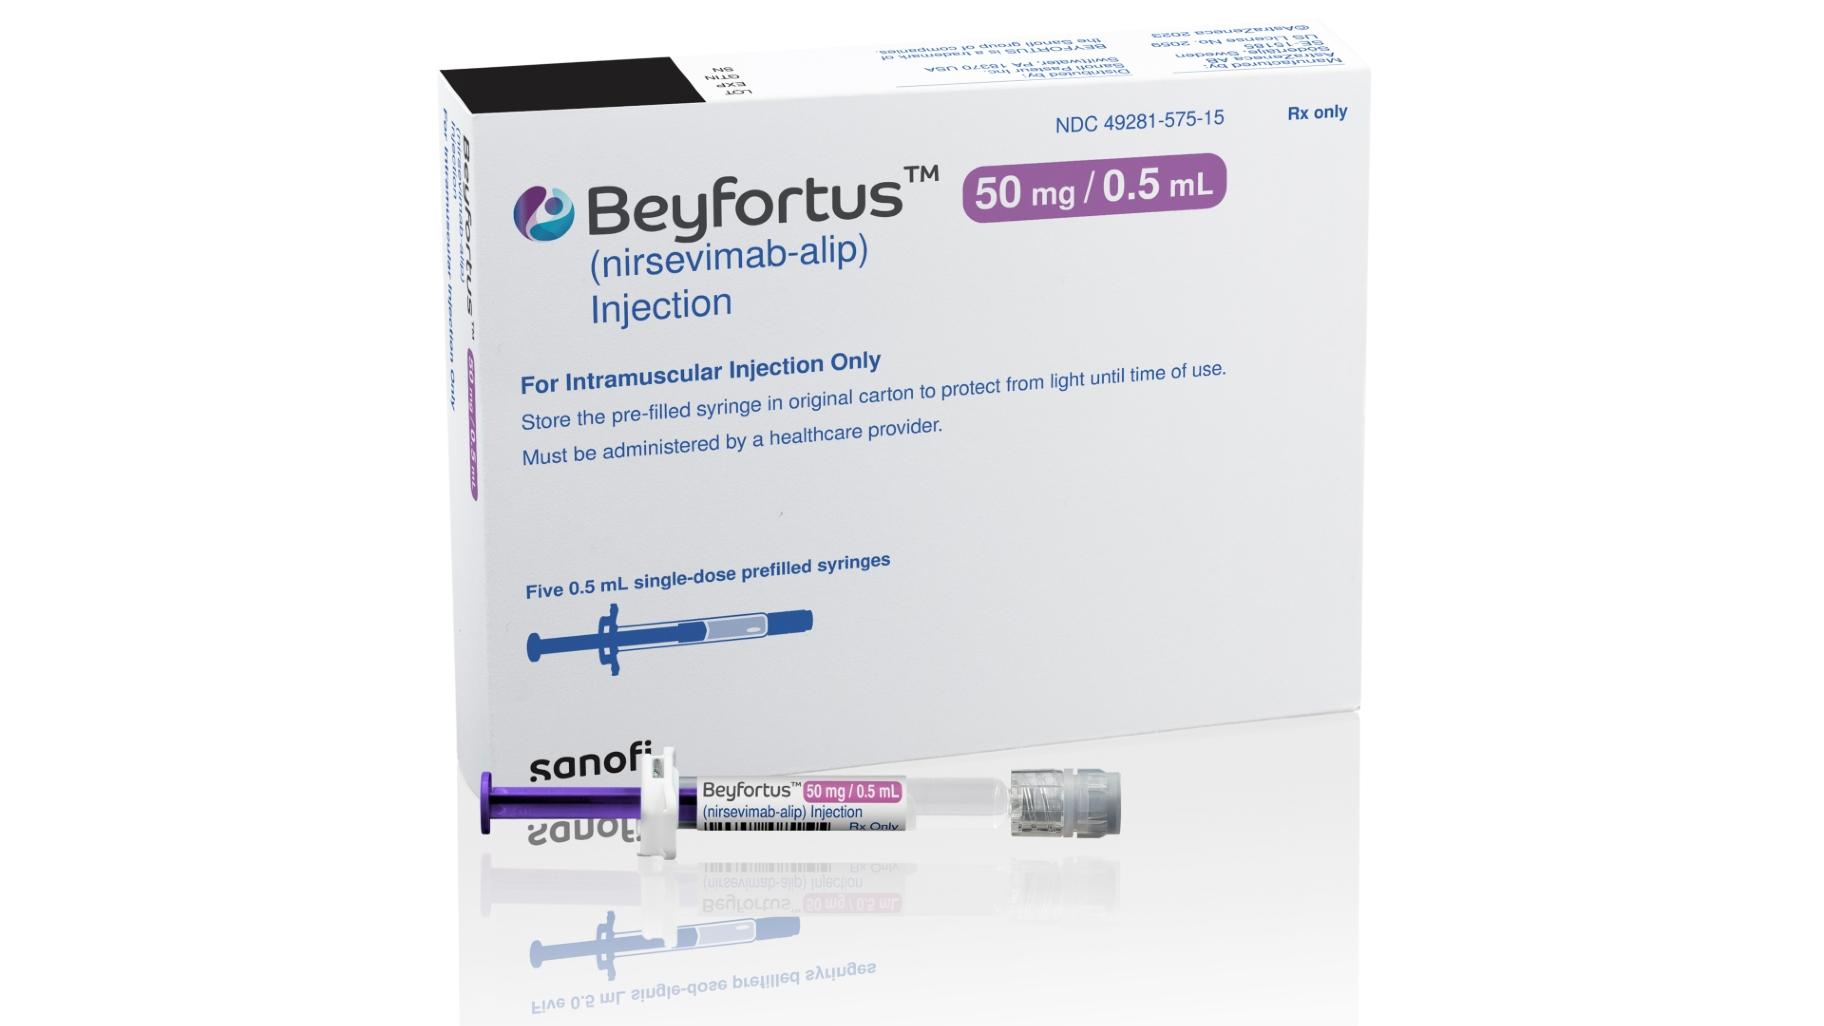 FILE - This illustration provided by AstraZeneca depicts packaging for its medication Beyfortus. (AstraZeneca via AP, File)